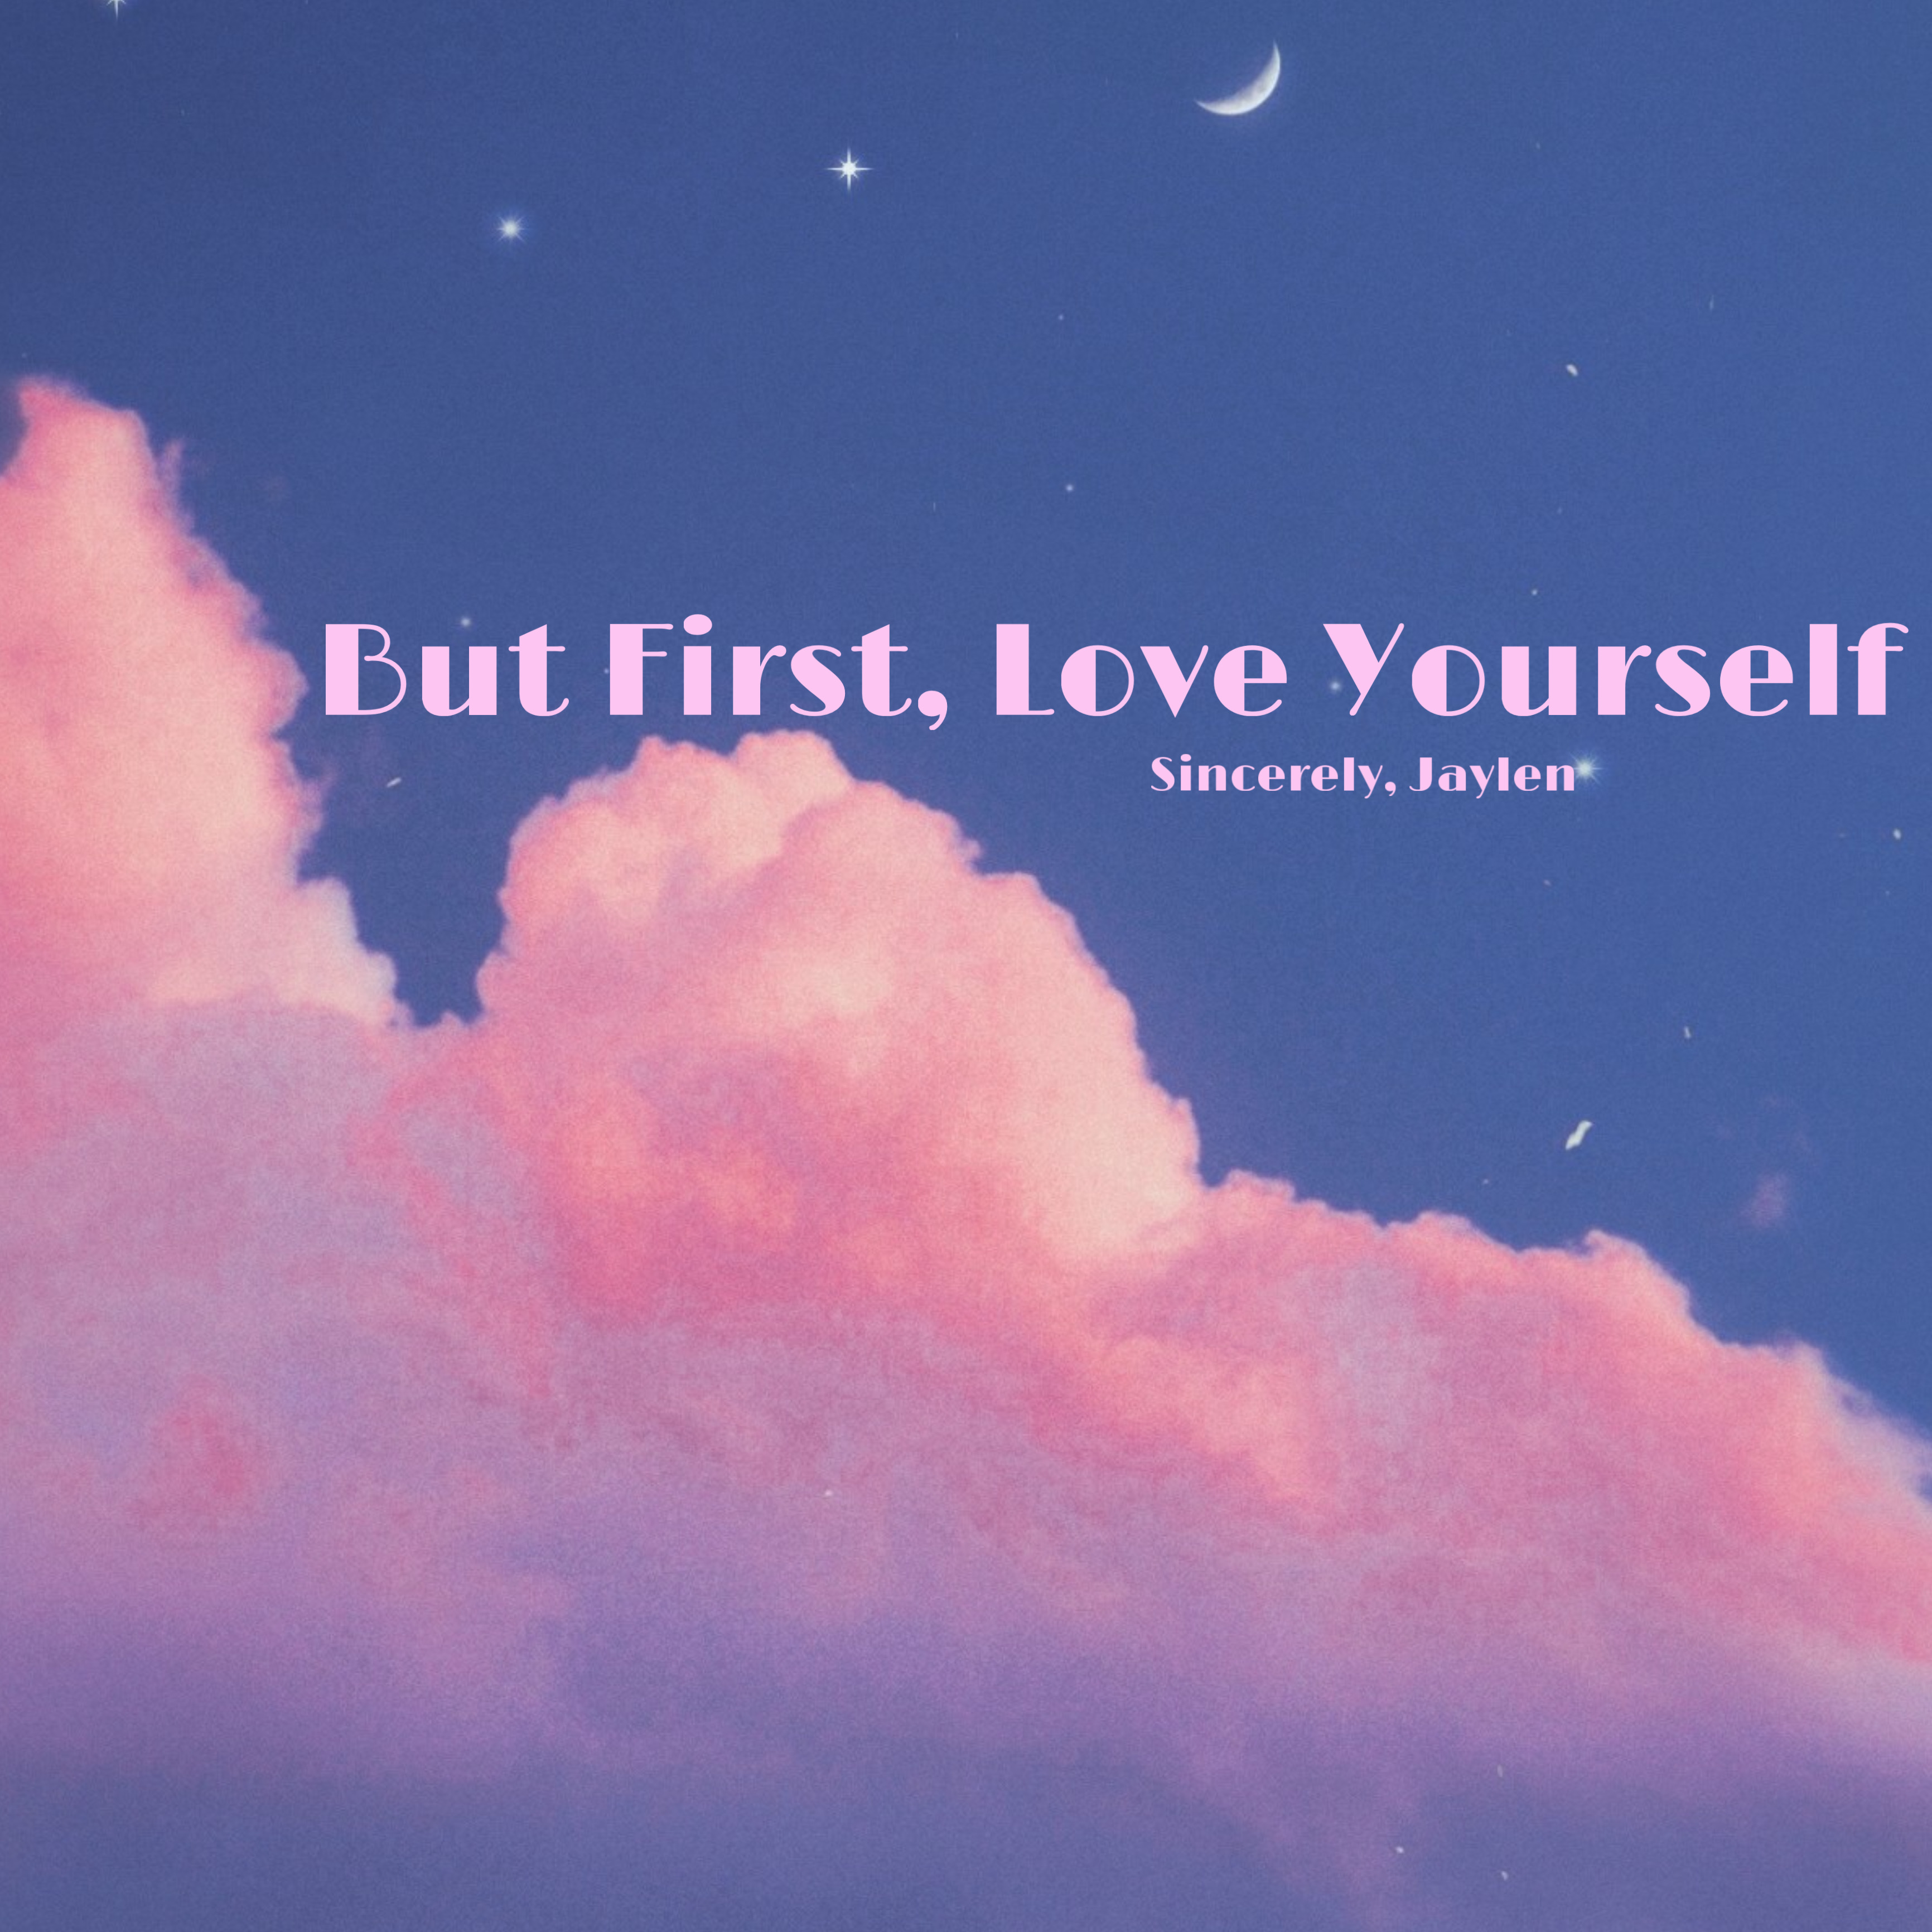 But First, Love Yourself